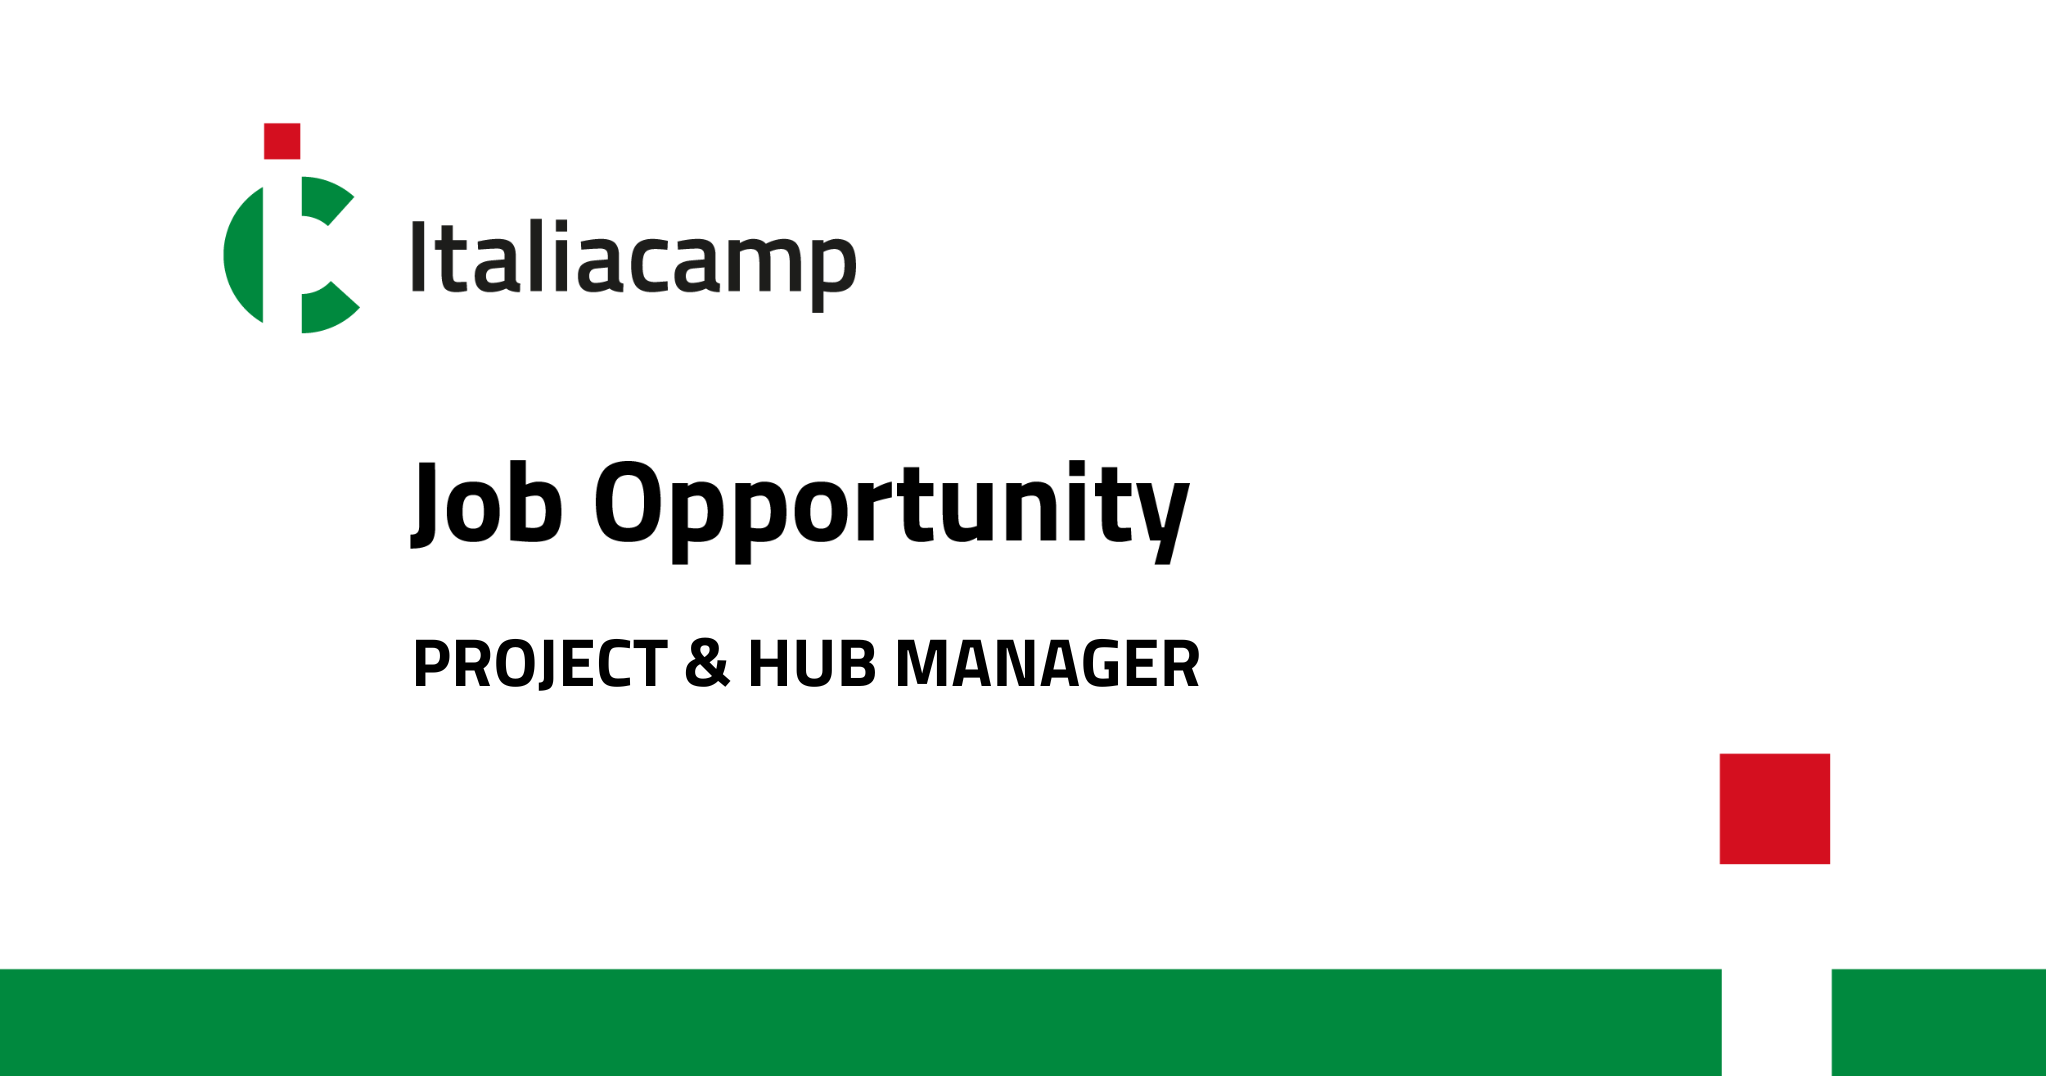 job opportunity italiacamp-project and hub manager roma